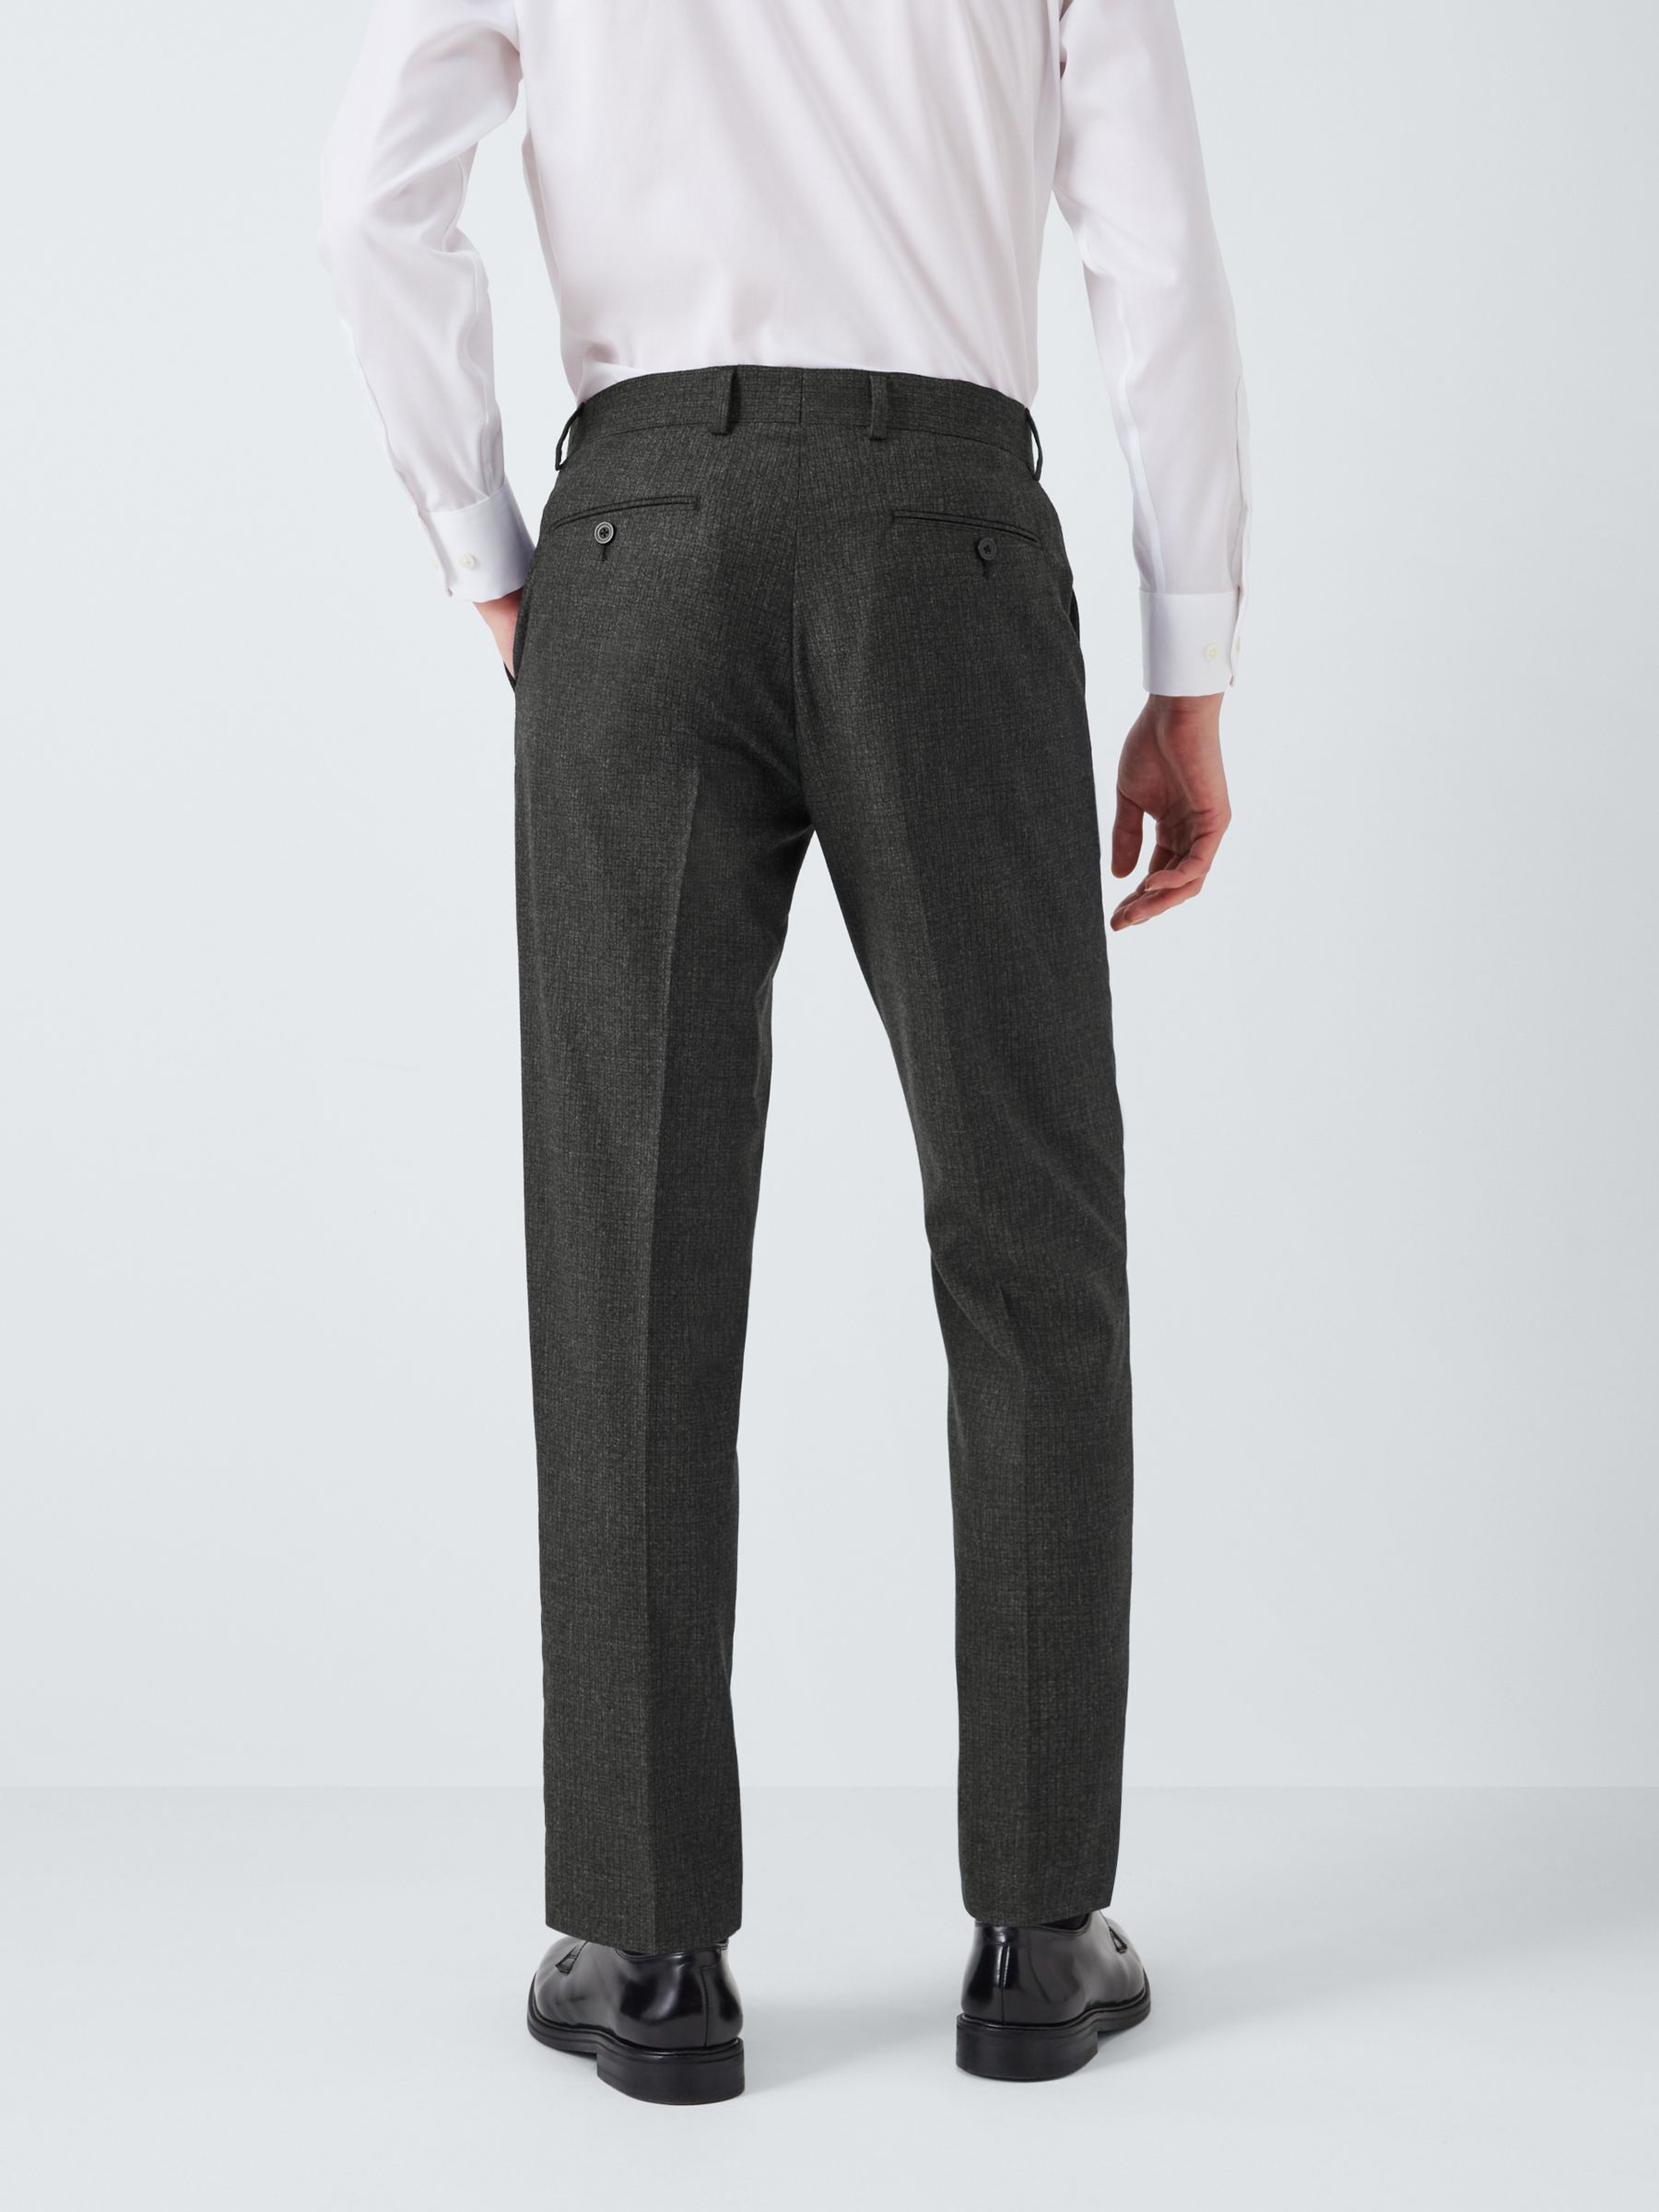 Wool trousers – buy a variety of fits online